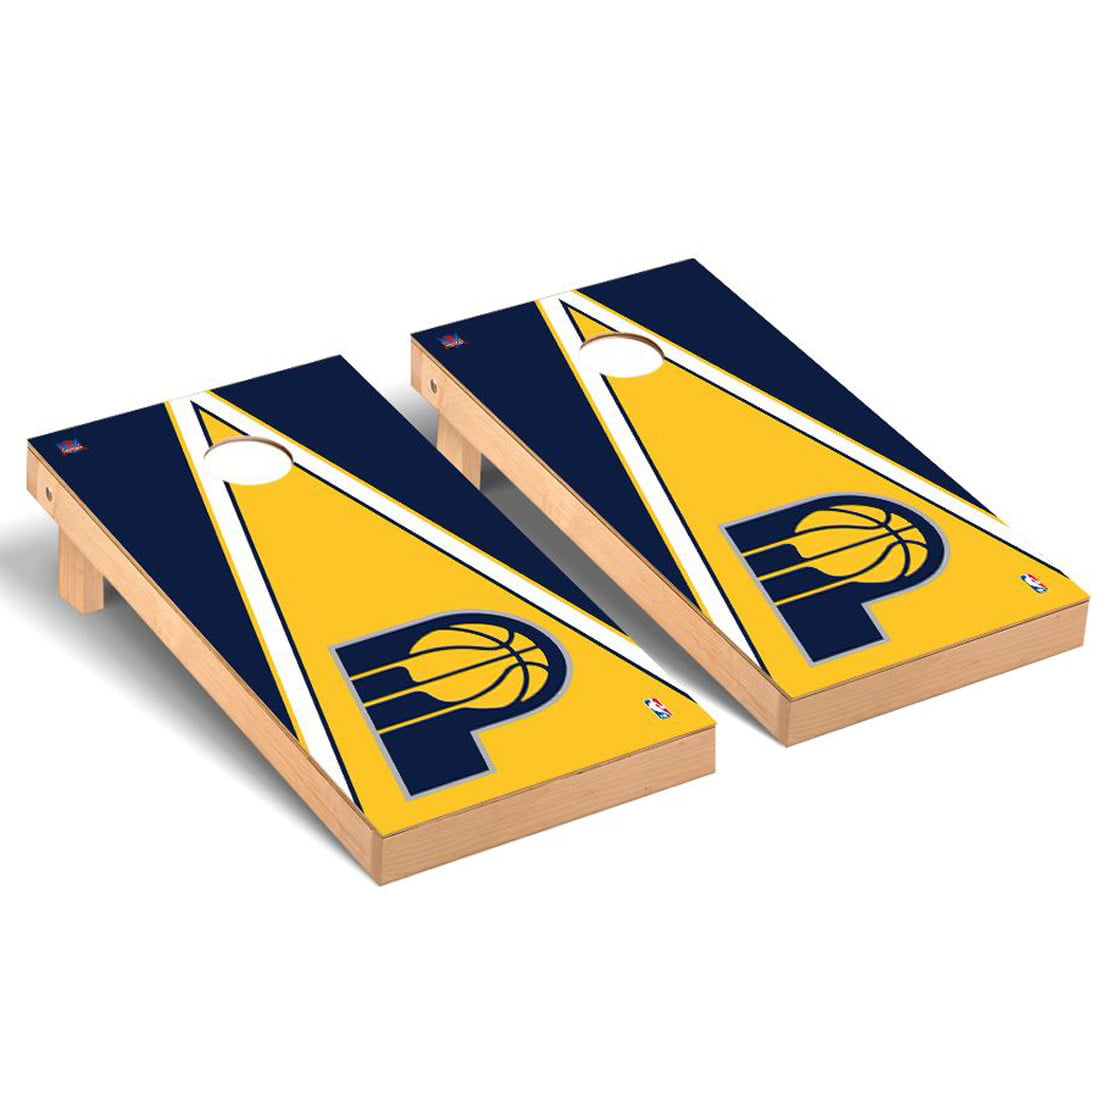 Indiana Pacers cornhole board or vehicle decal IP1 s 